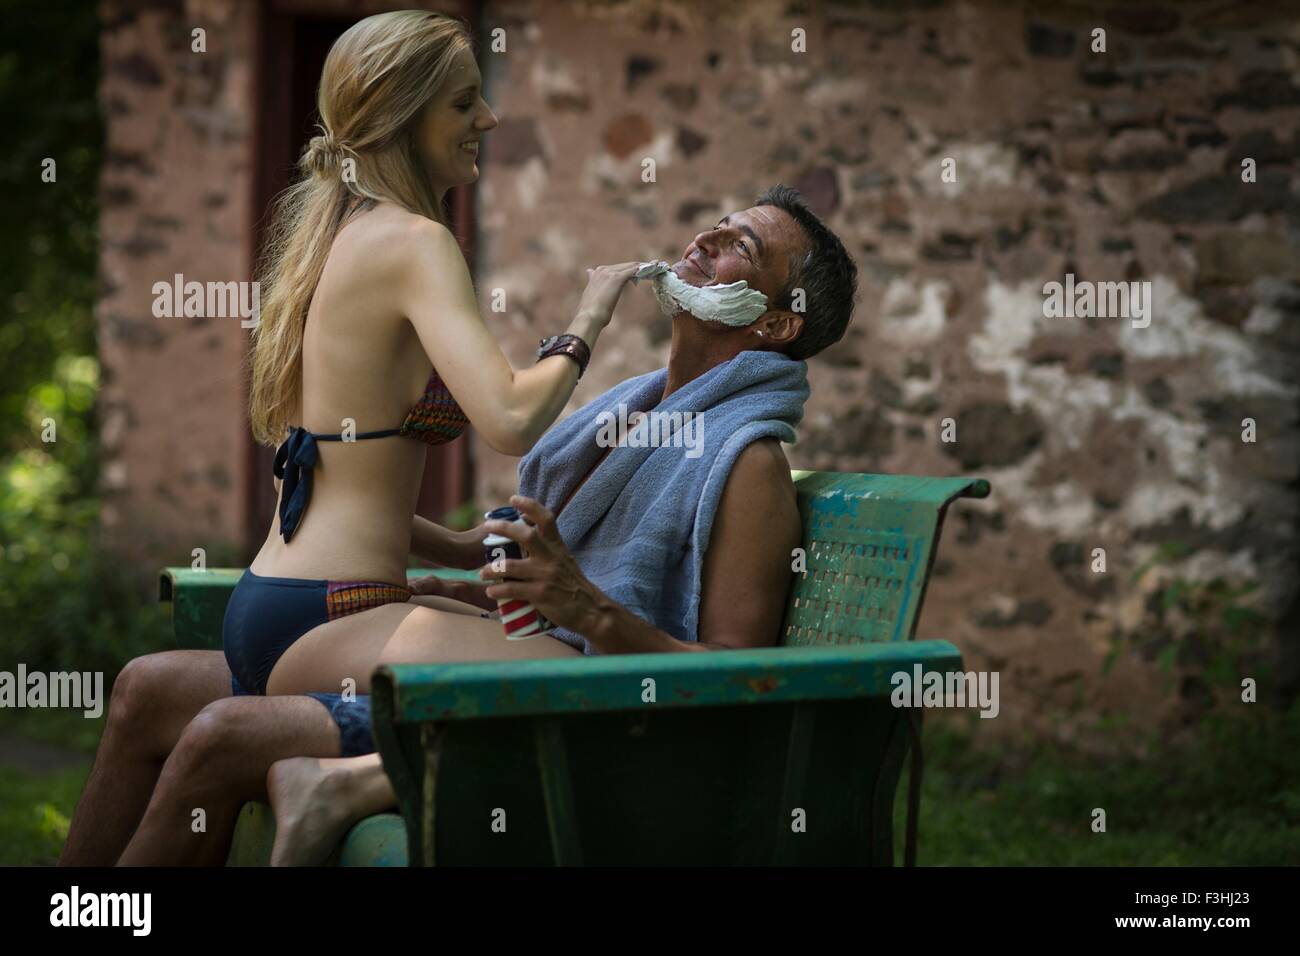 Young woman in bikini sitting on boyfriends lap applying shaving cream at holiday cottage Stock Photo